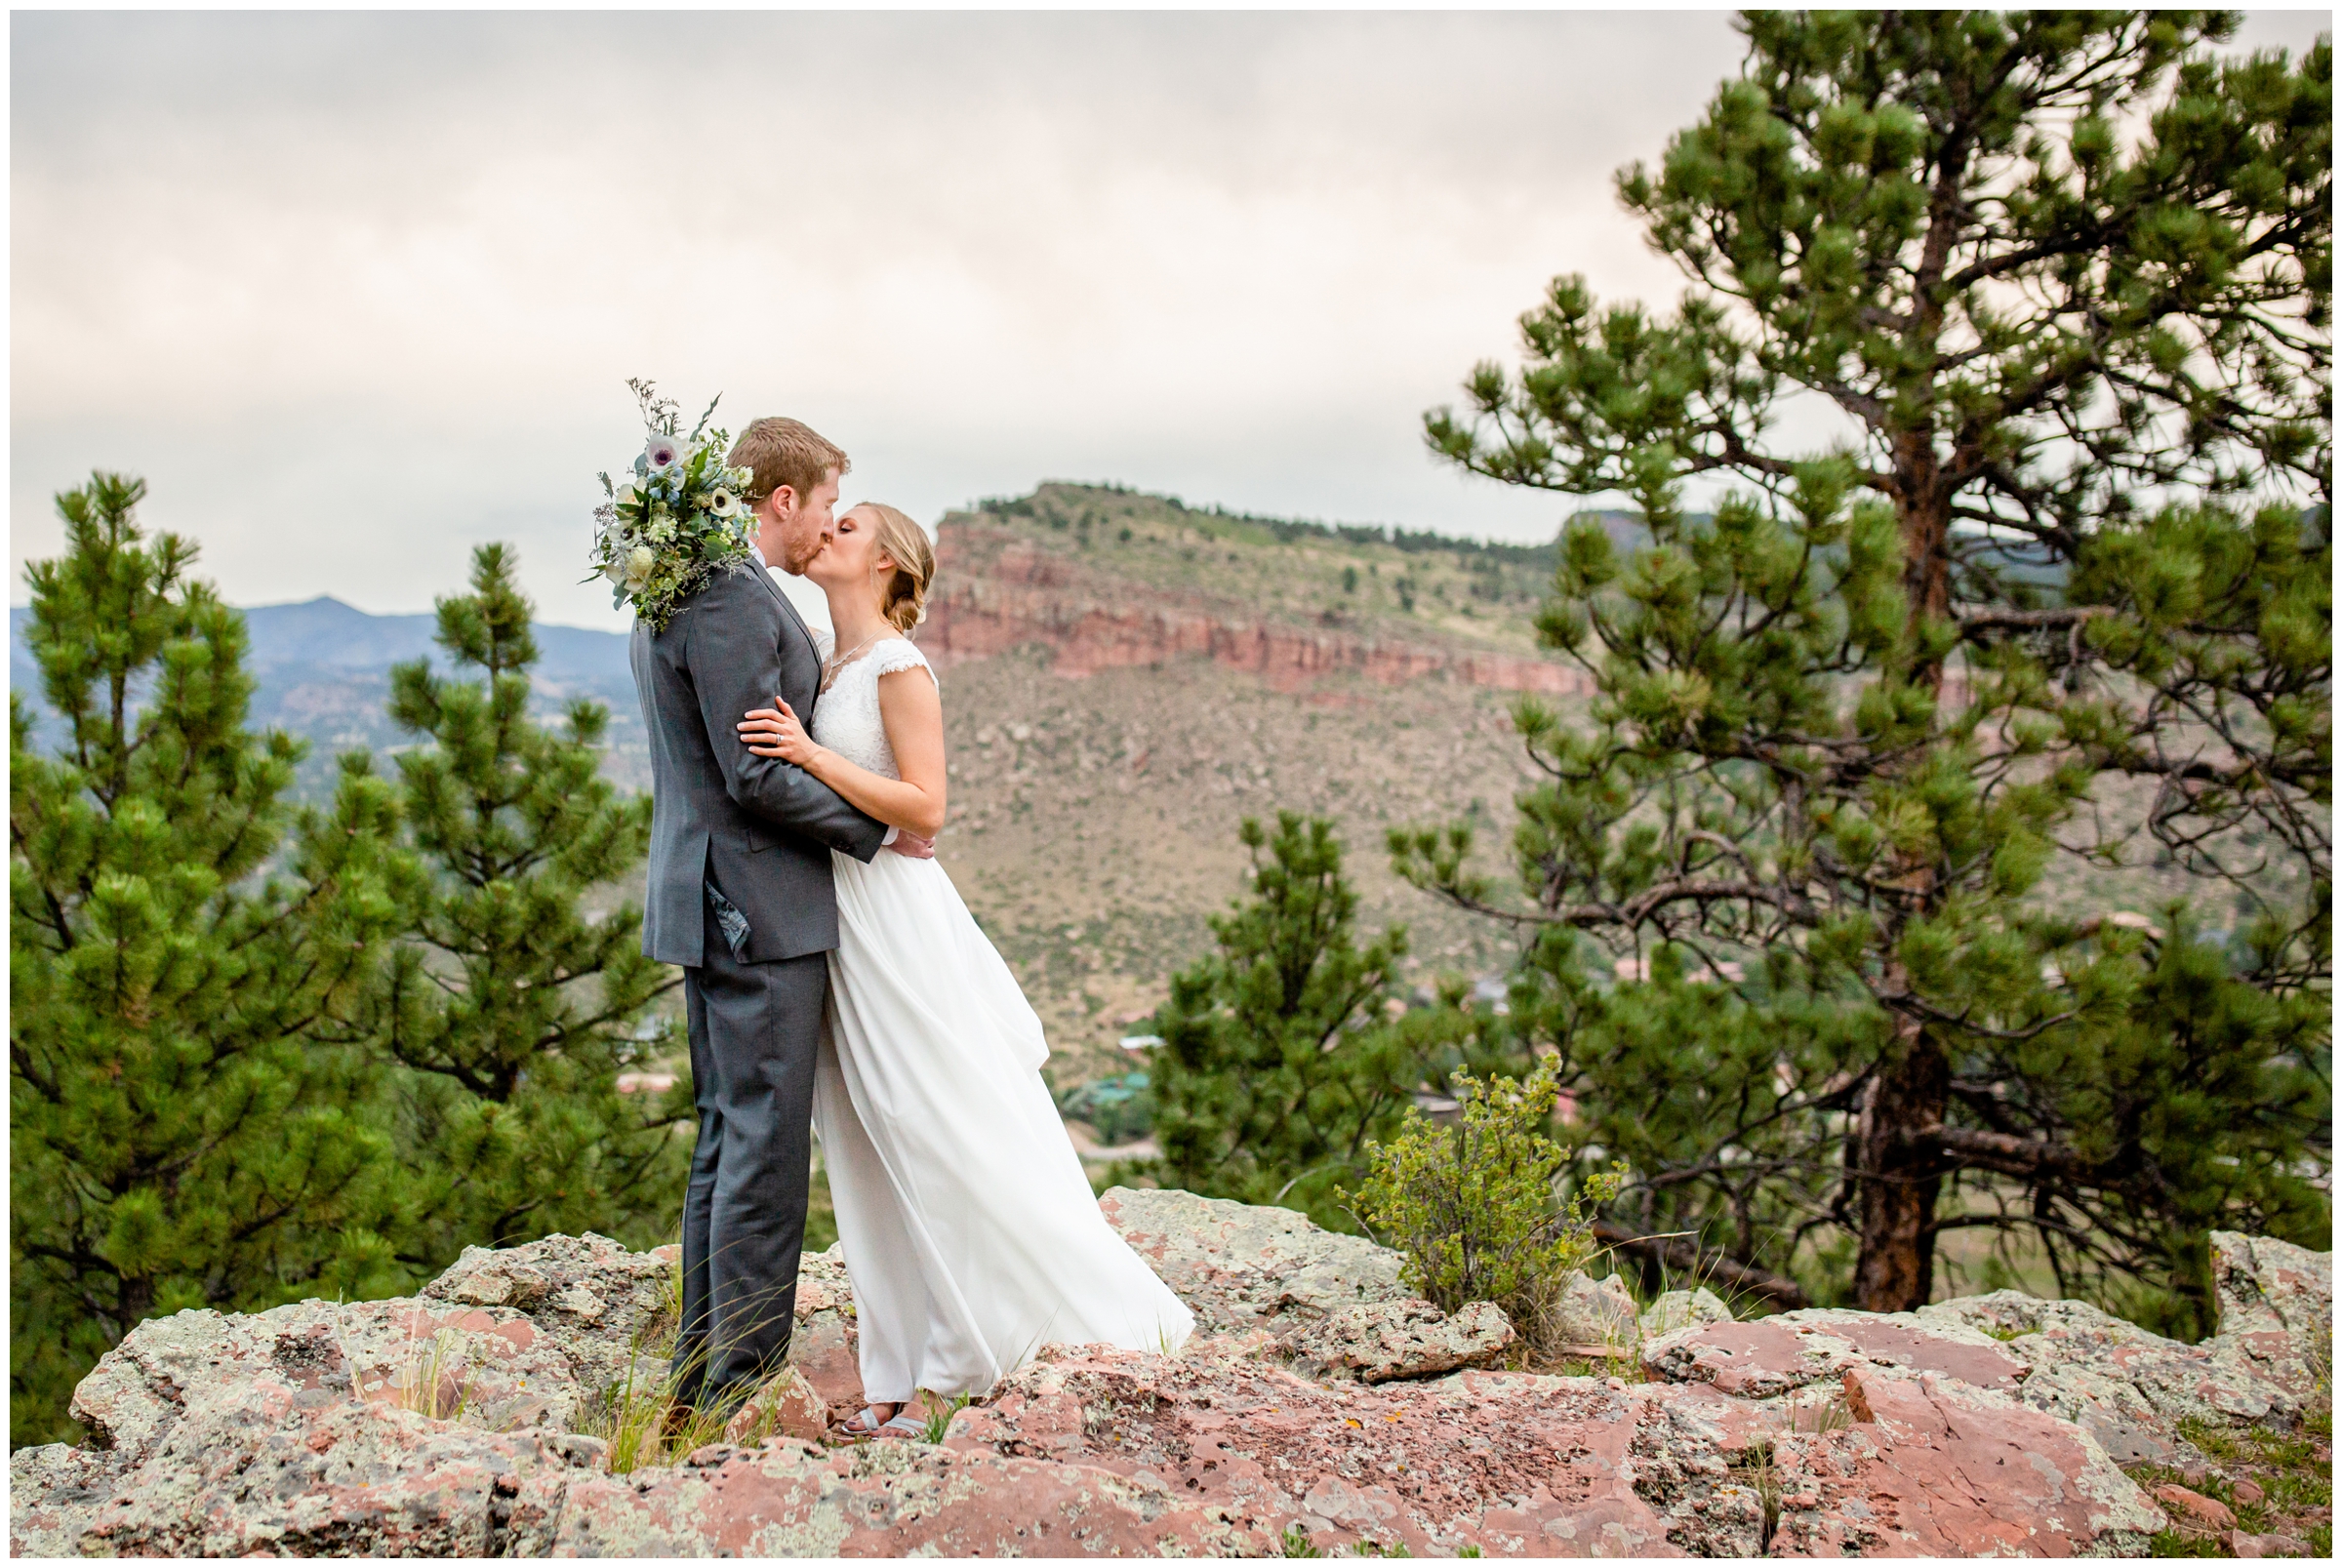 couple kissing on the edge of cliff during mountain wedding portraits at Lionscrest Manor